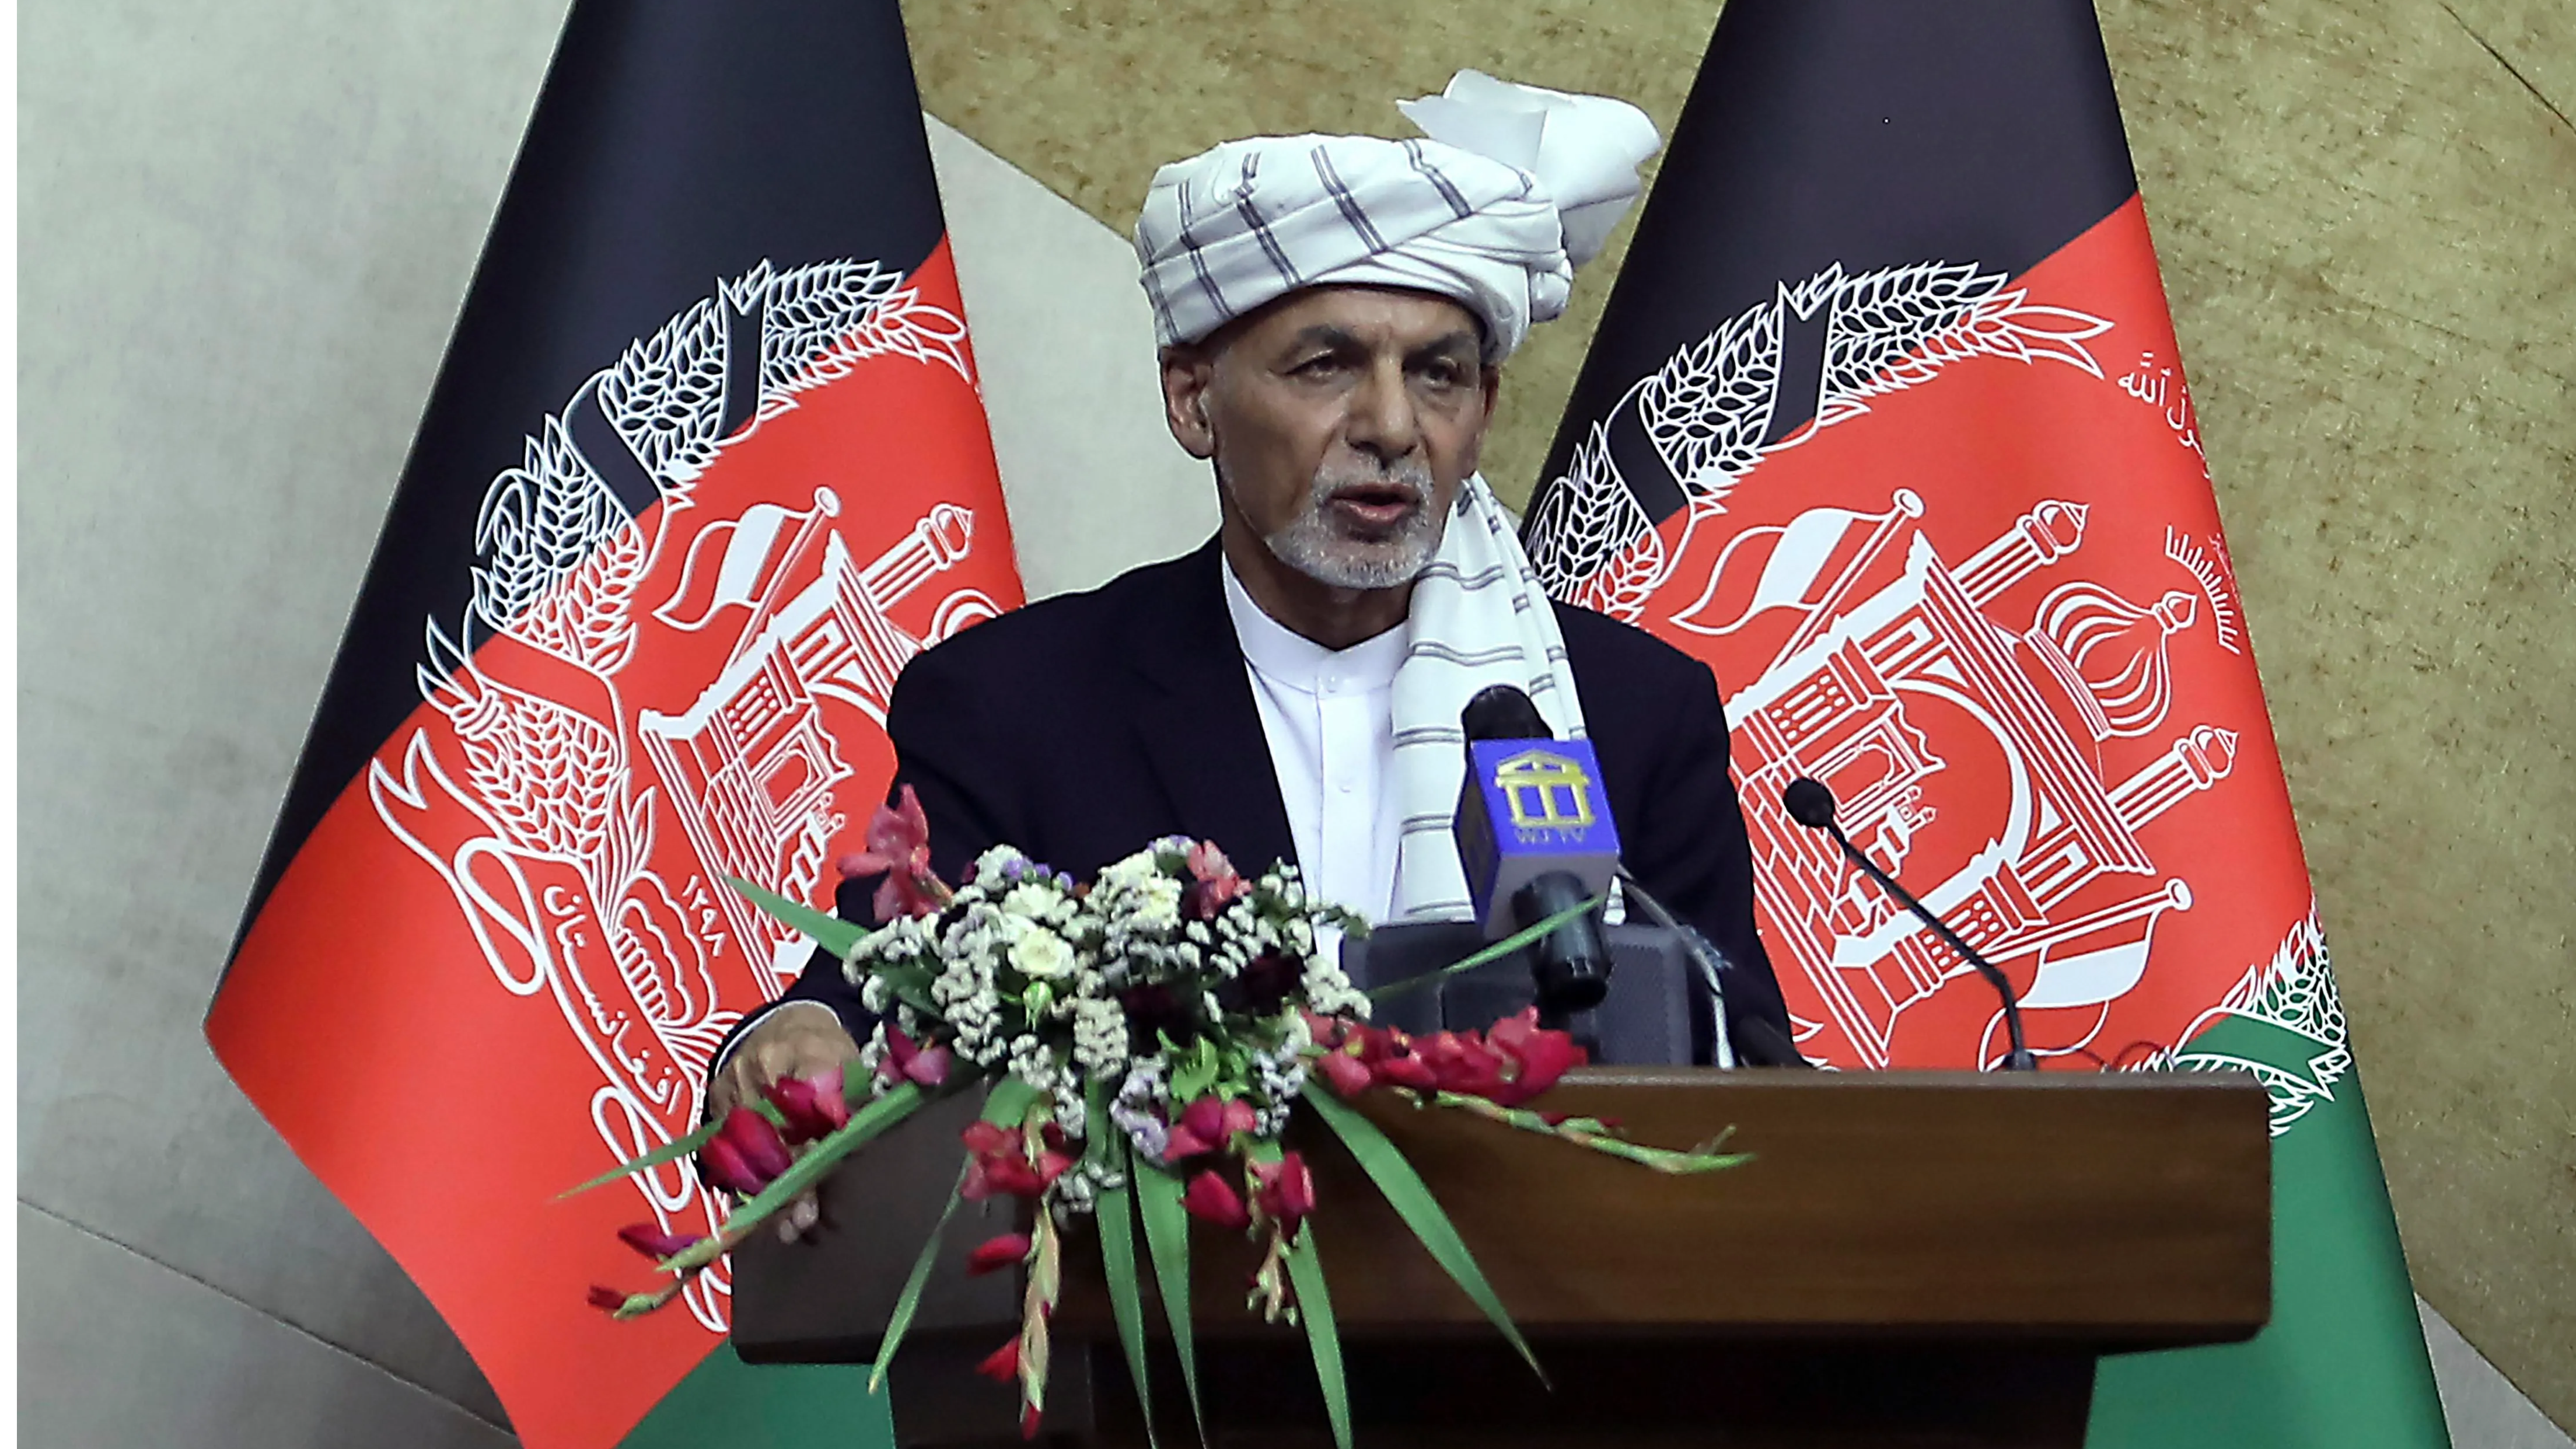 Ashraf Ghani fled Afghanistan with helicopter full of cash: Report